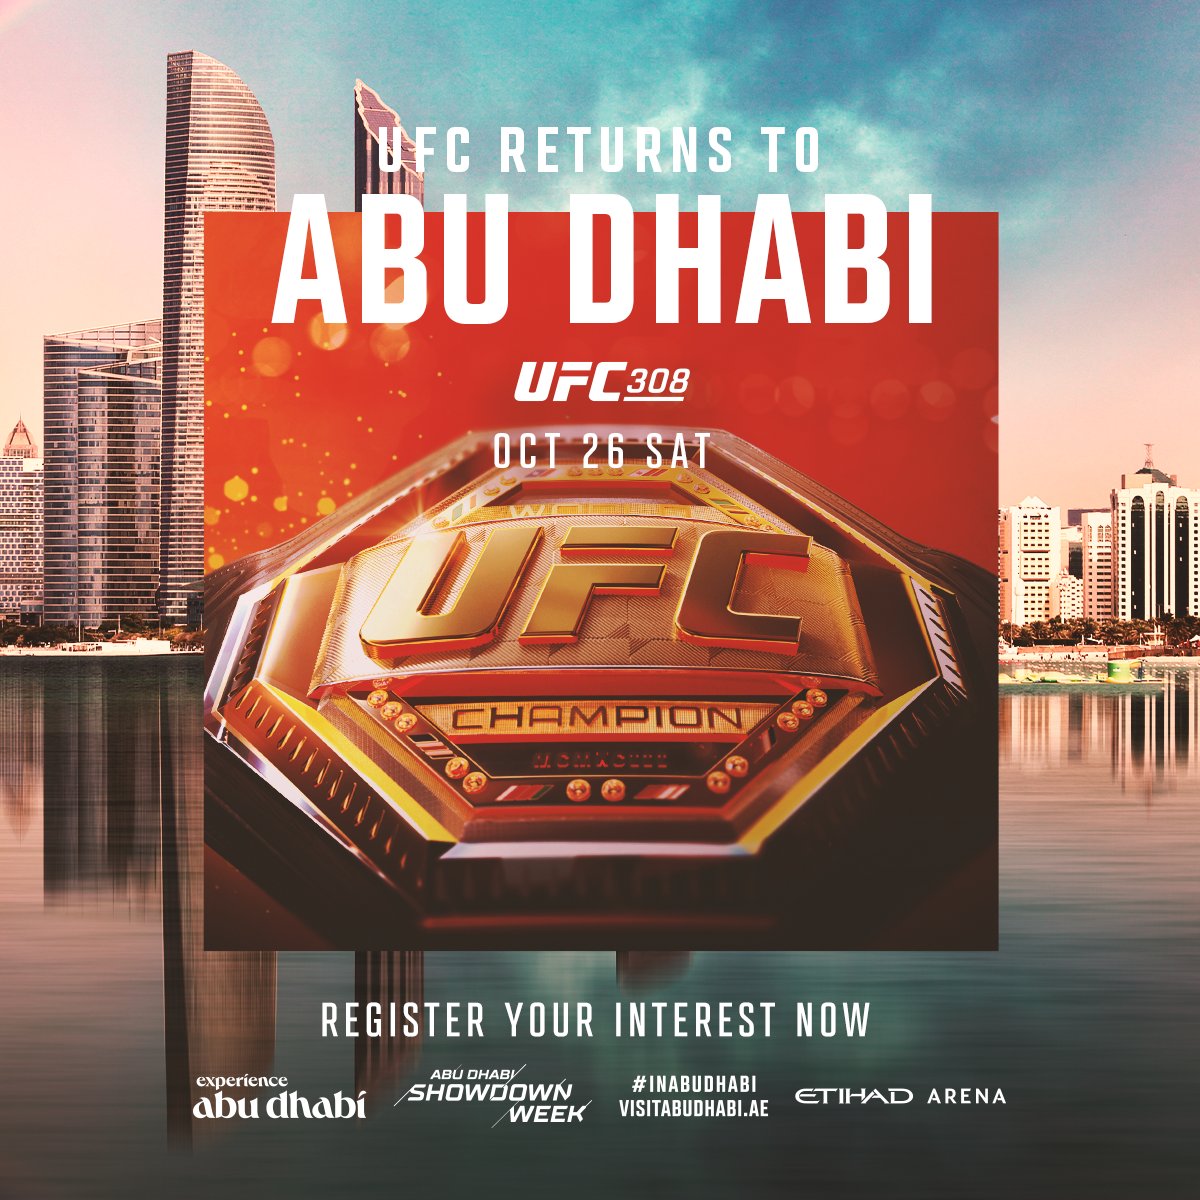 Abu Dhabi Showdown Week is LOCKED IN 🔒

We'll be seeing you for #UFC308 

More info: UFC.ac/3vNhRDo

@VisitAbuDhabi | @InAbuDhabi | #InAbuDhabi